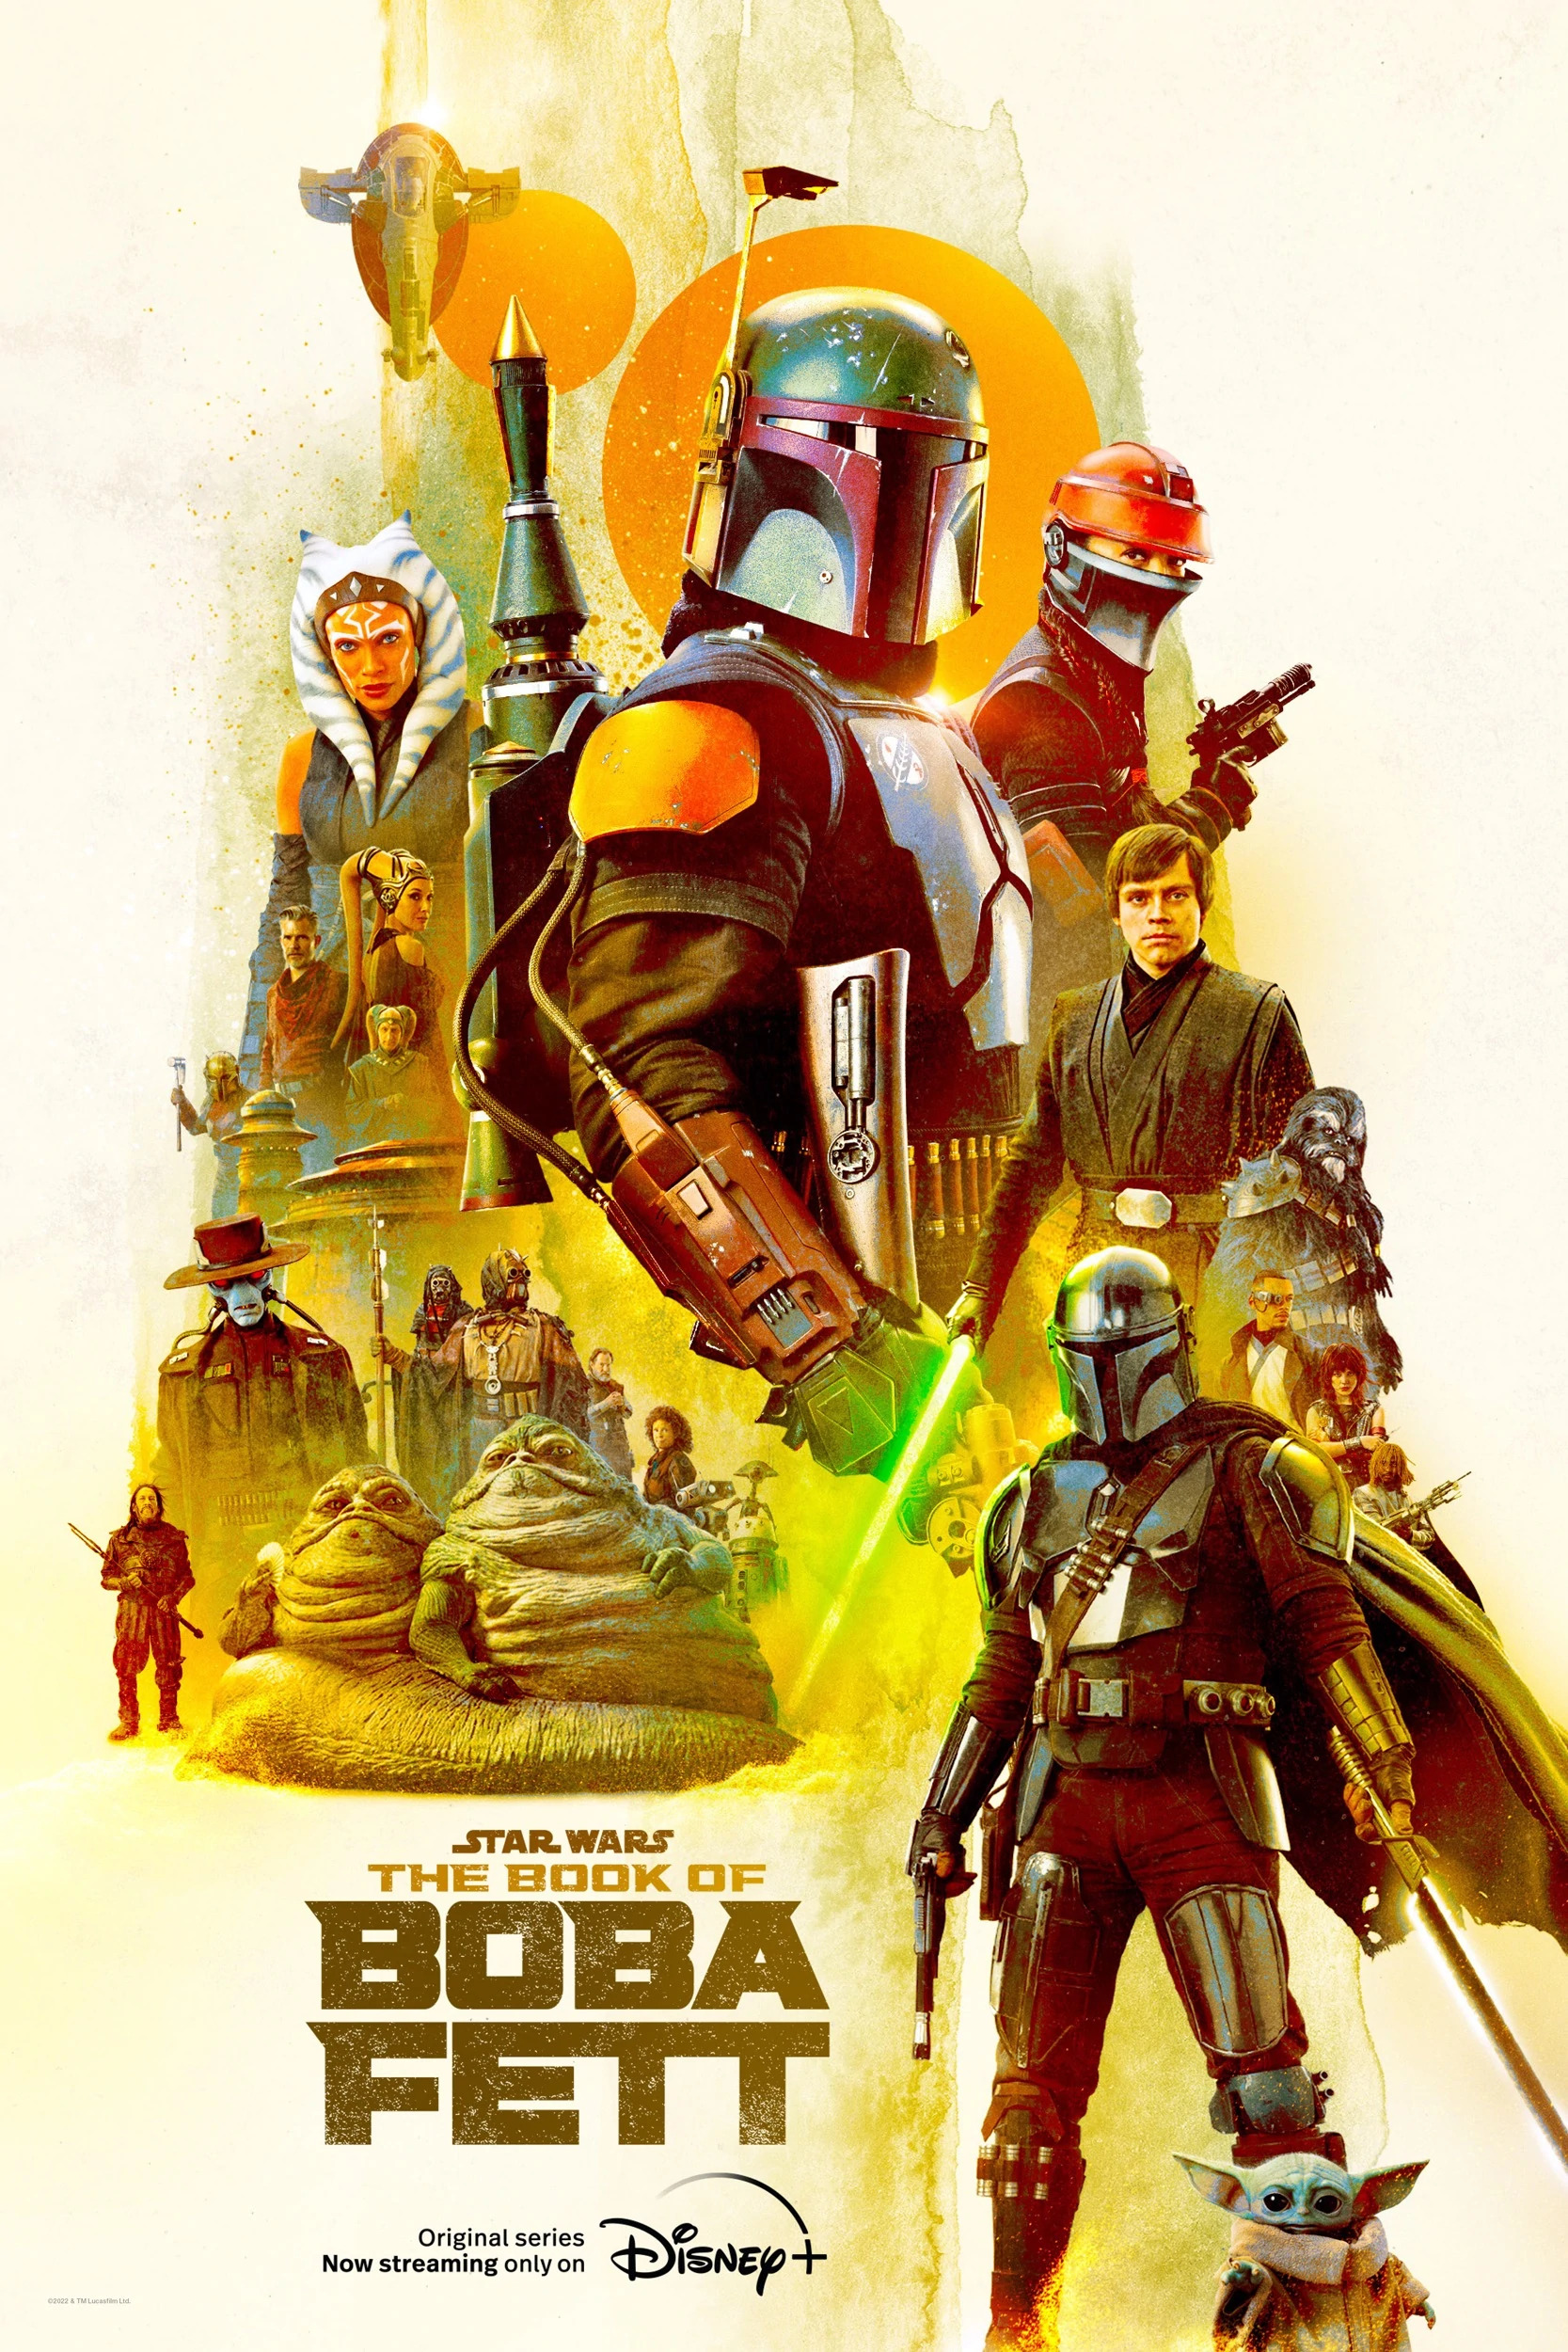 Mega Sized Movie Poster Image for The Book of Boba Fett (#18 of 18)